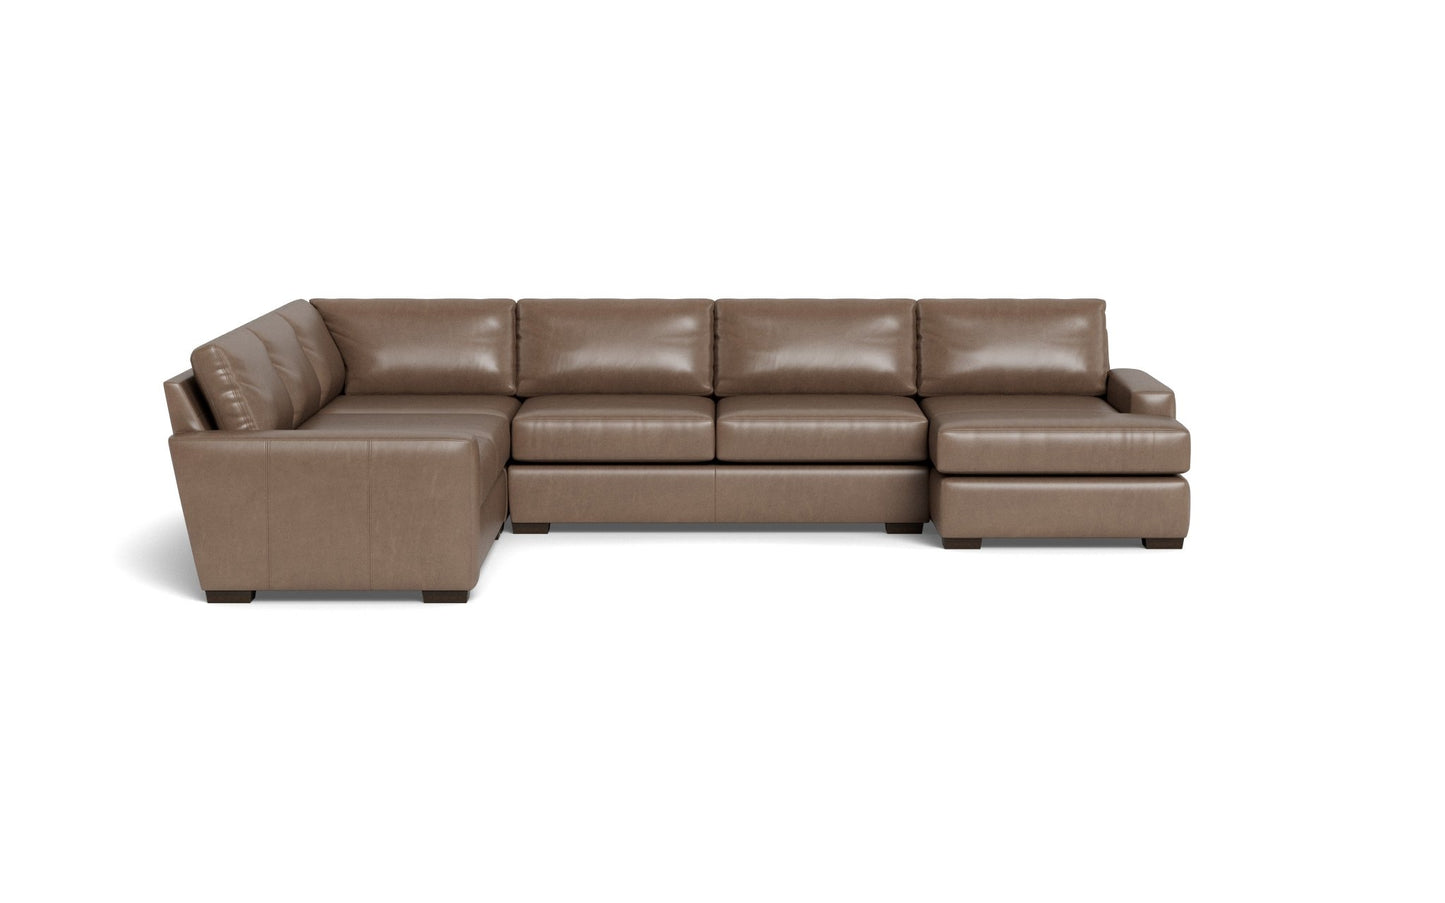 Mas Mesa Leather Corner Sectionals w. Right Chaise